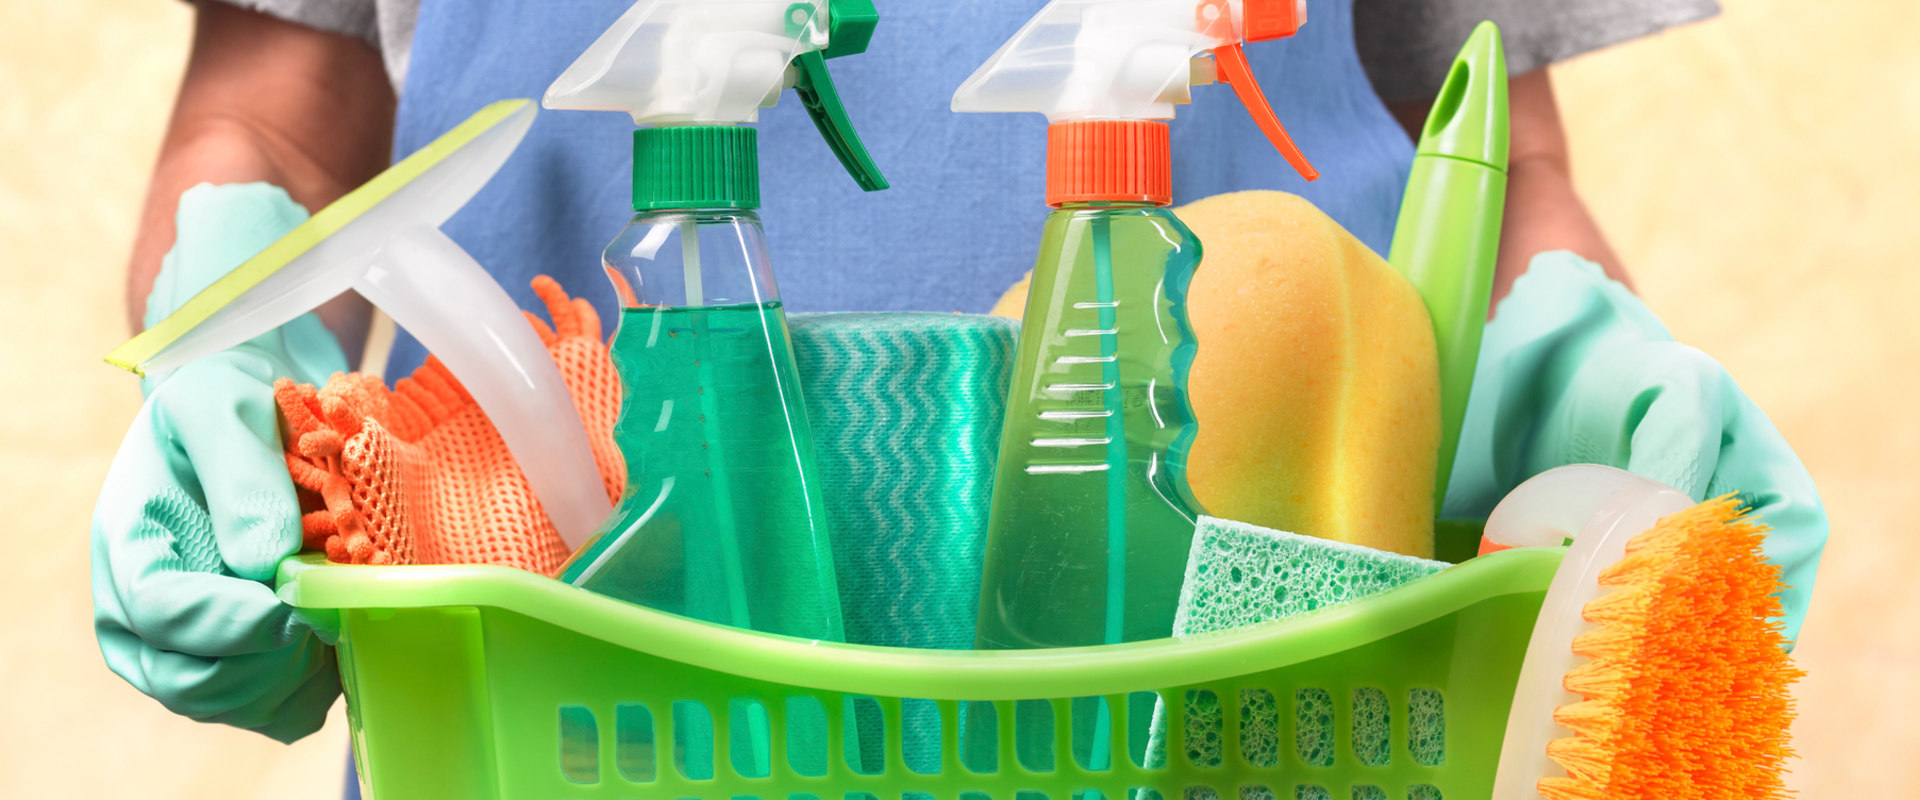 What are the 3 potential health risks of using cleaning products?